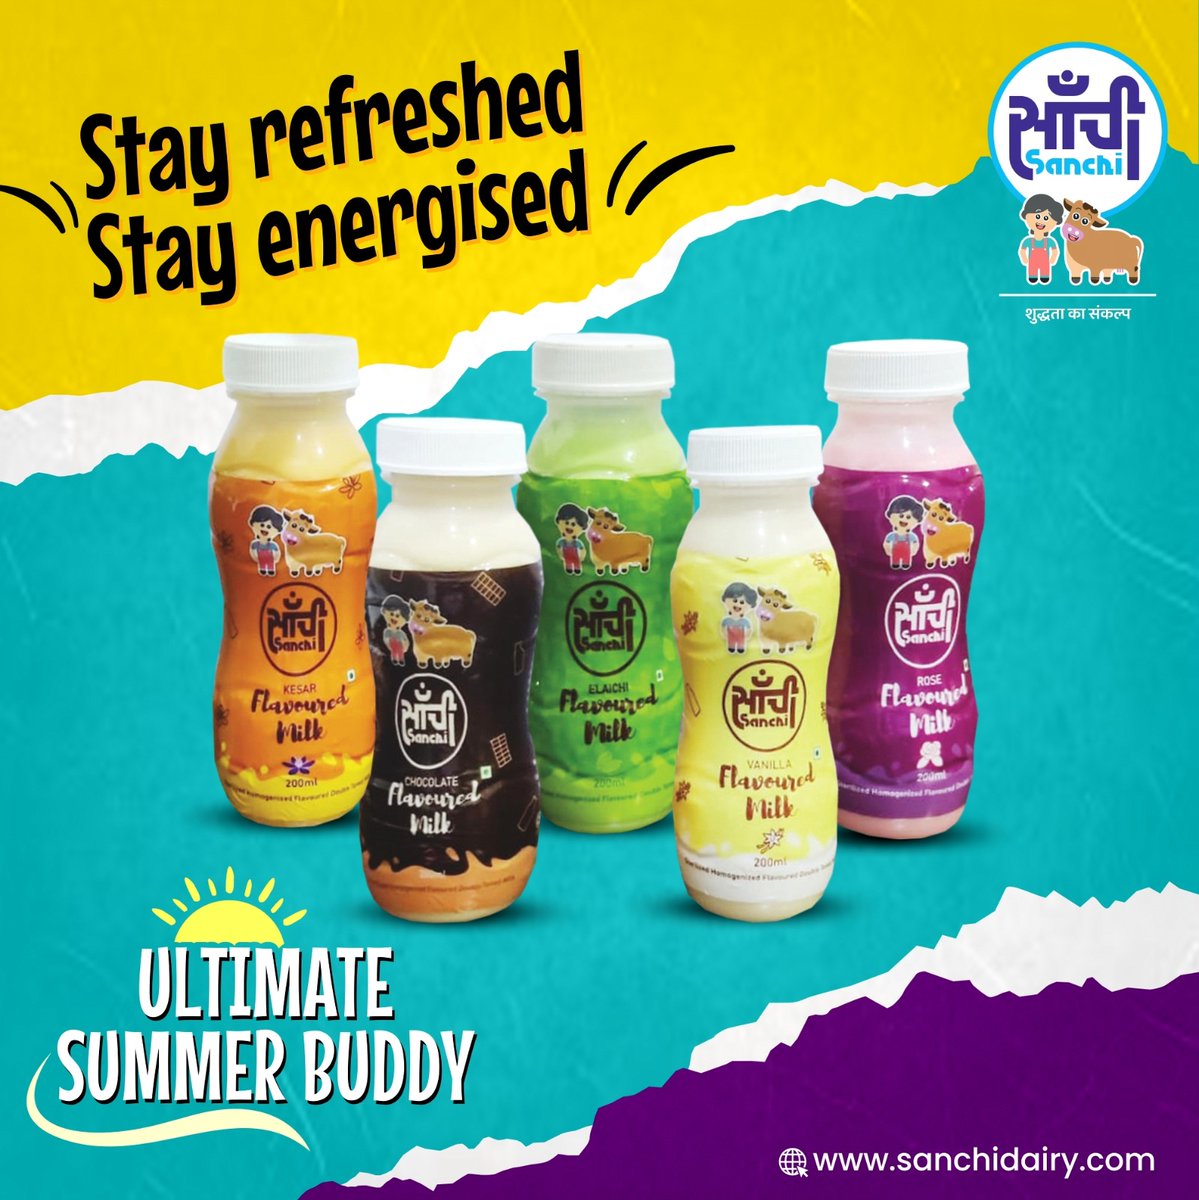 Beat the summer heat with our refreshing flavored milk varieties! From classic #Vanilla and #strawberry to exotic Kesar Pista, our range of flavored milk is the perfect way to cool down and indulge in a delicious treat.
#flavouredmilk #milk #sanchiproducts #summer